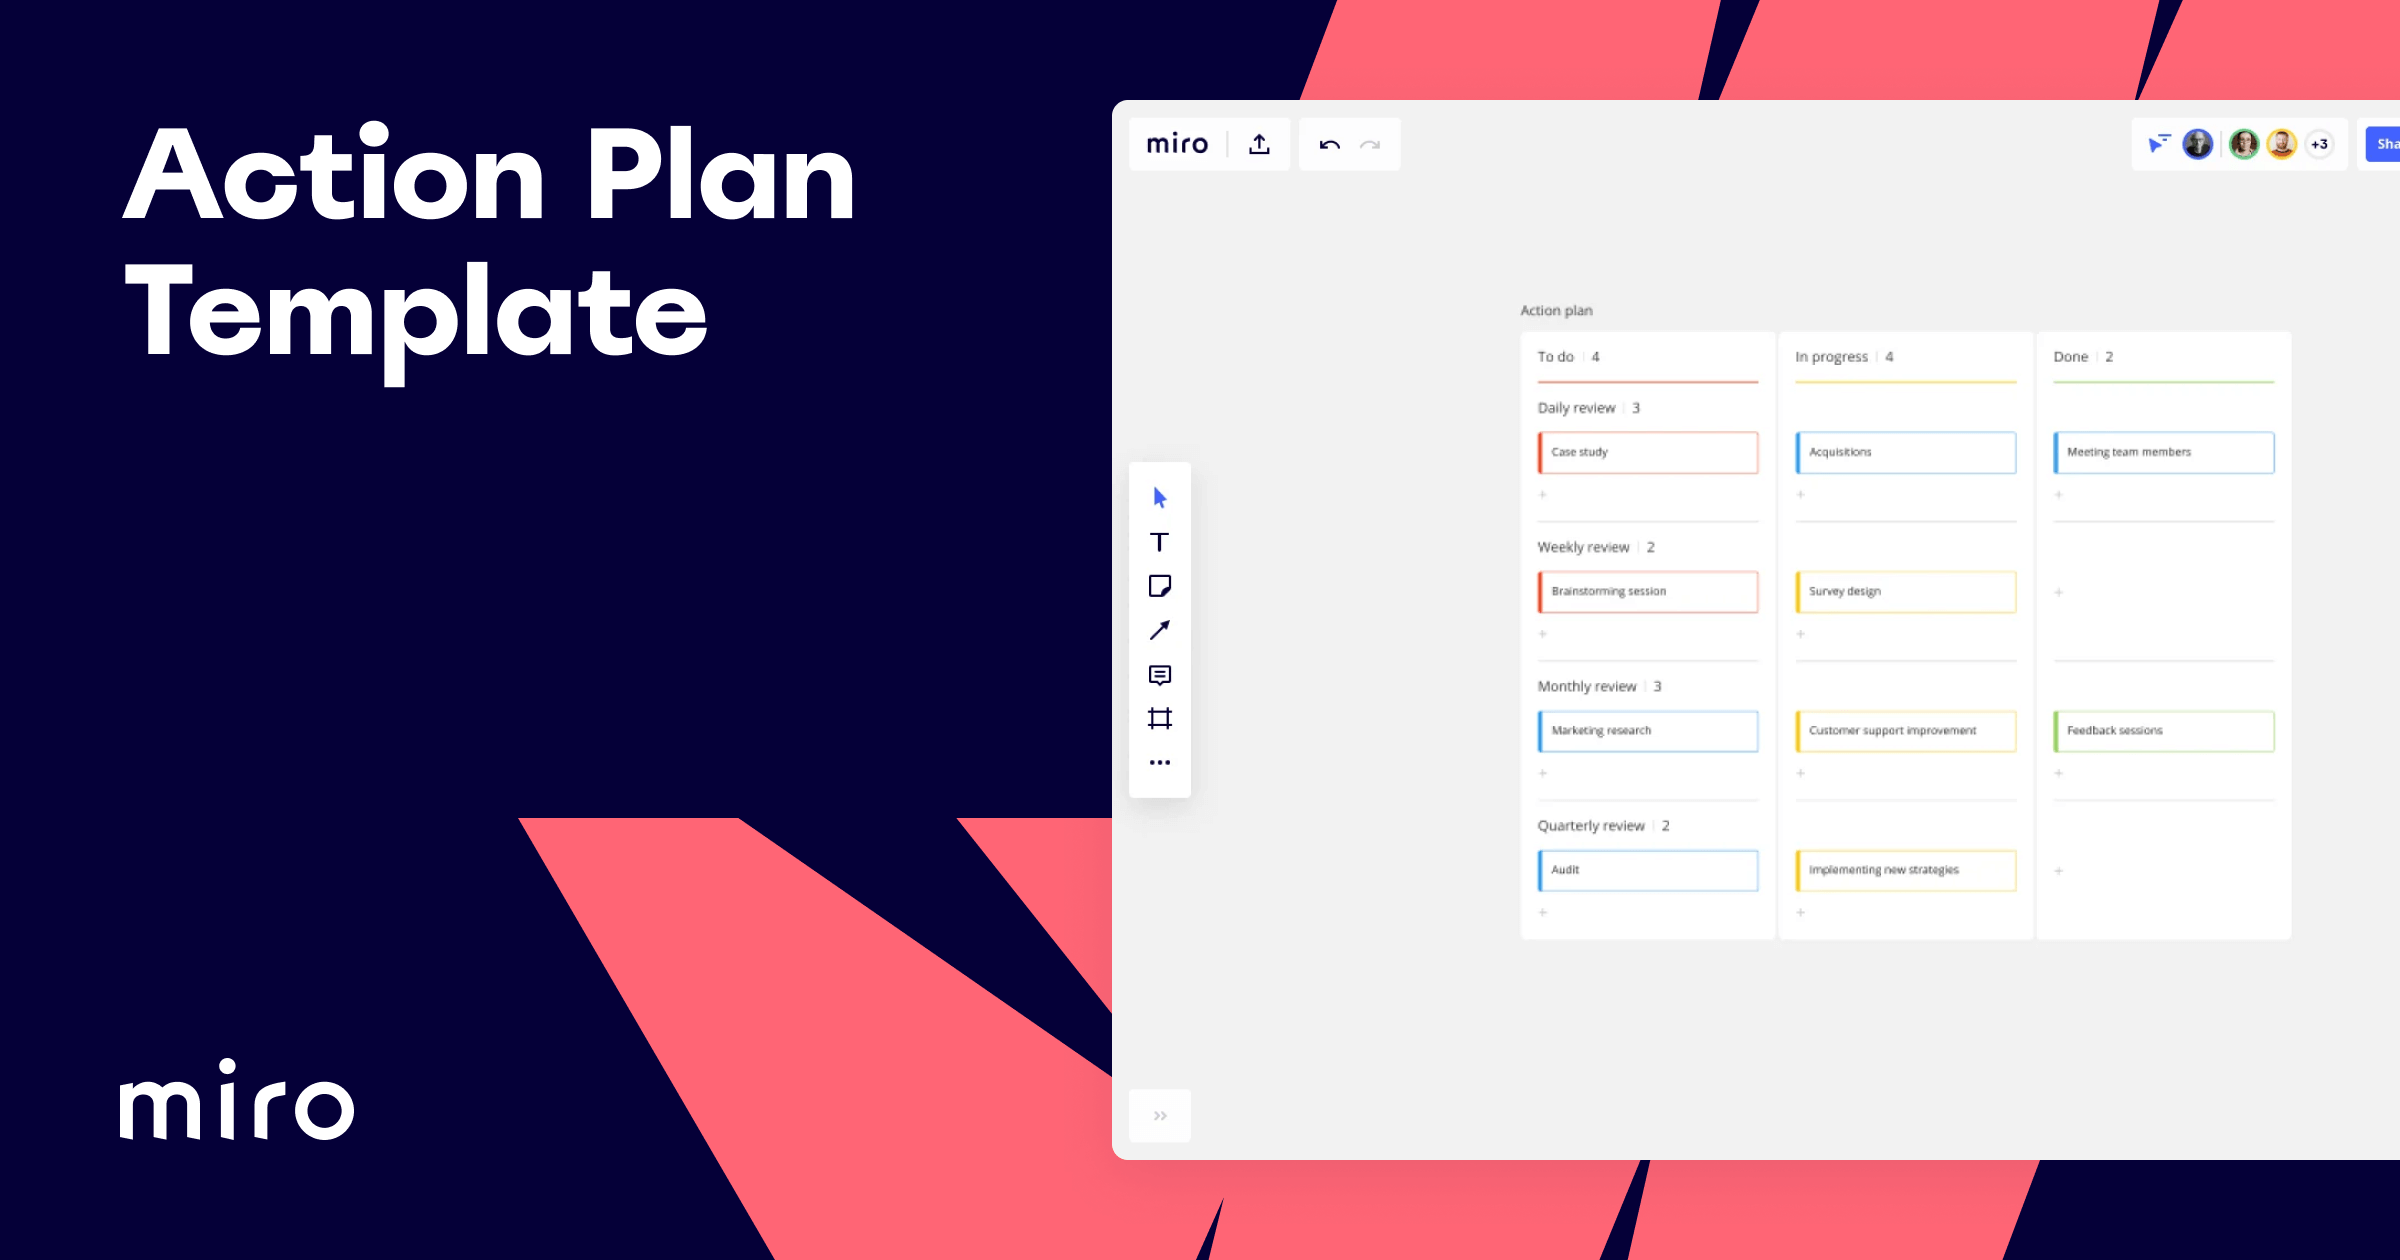 Action Plan Template: How To Write an Action Plan + Examples | Miro